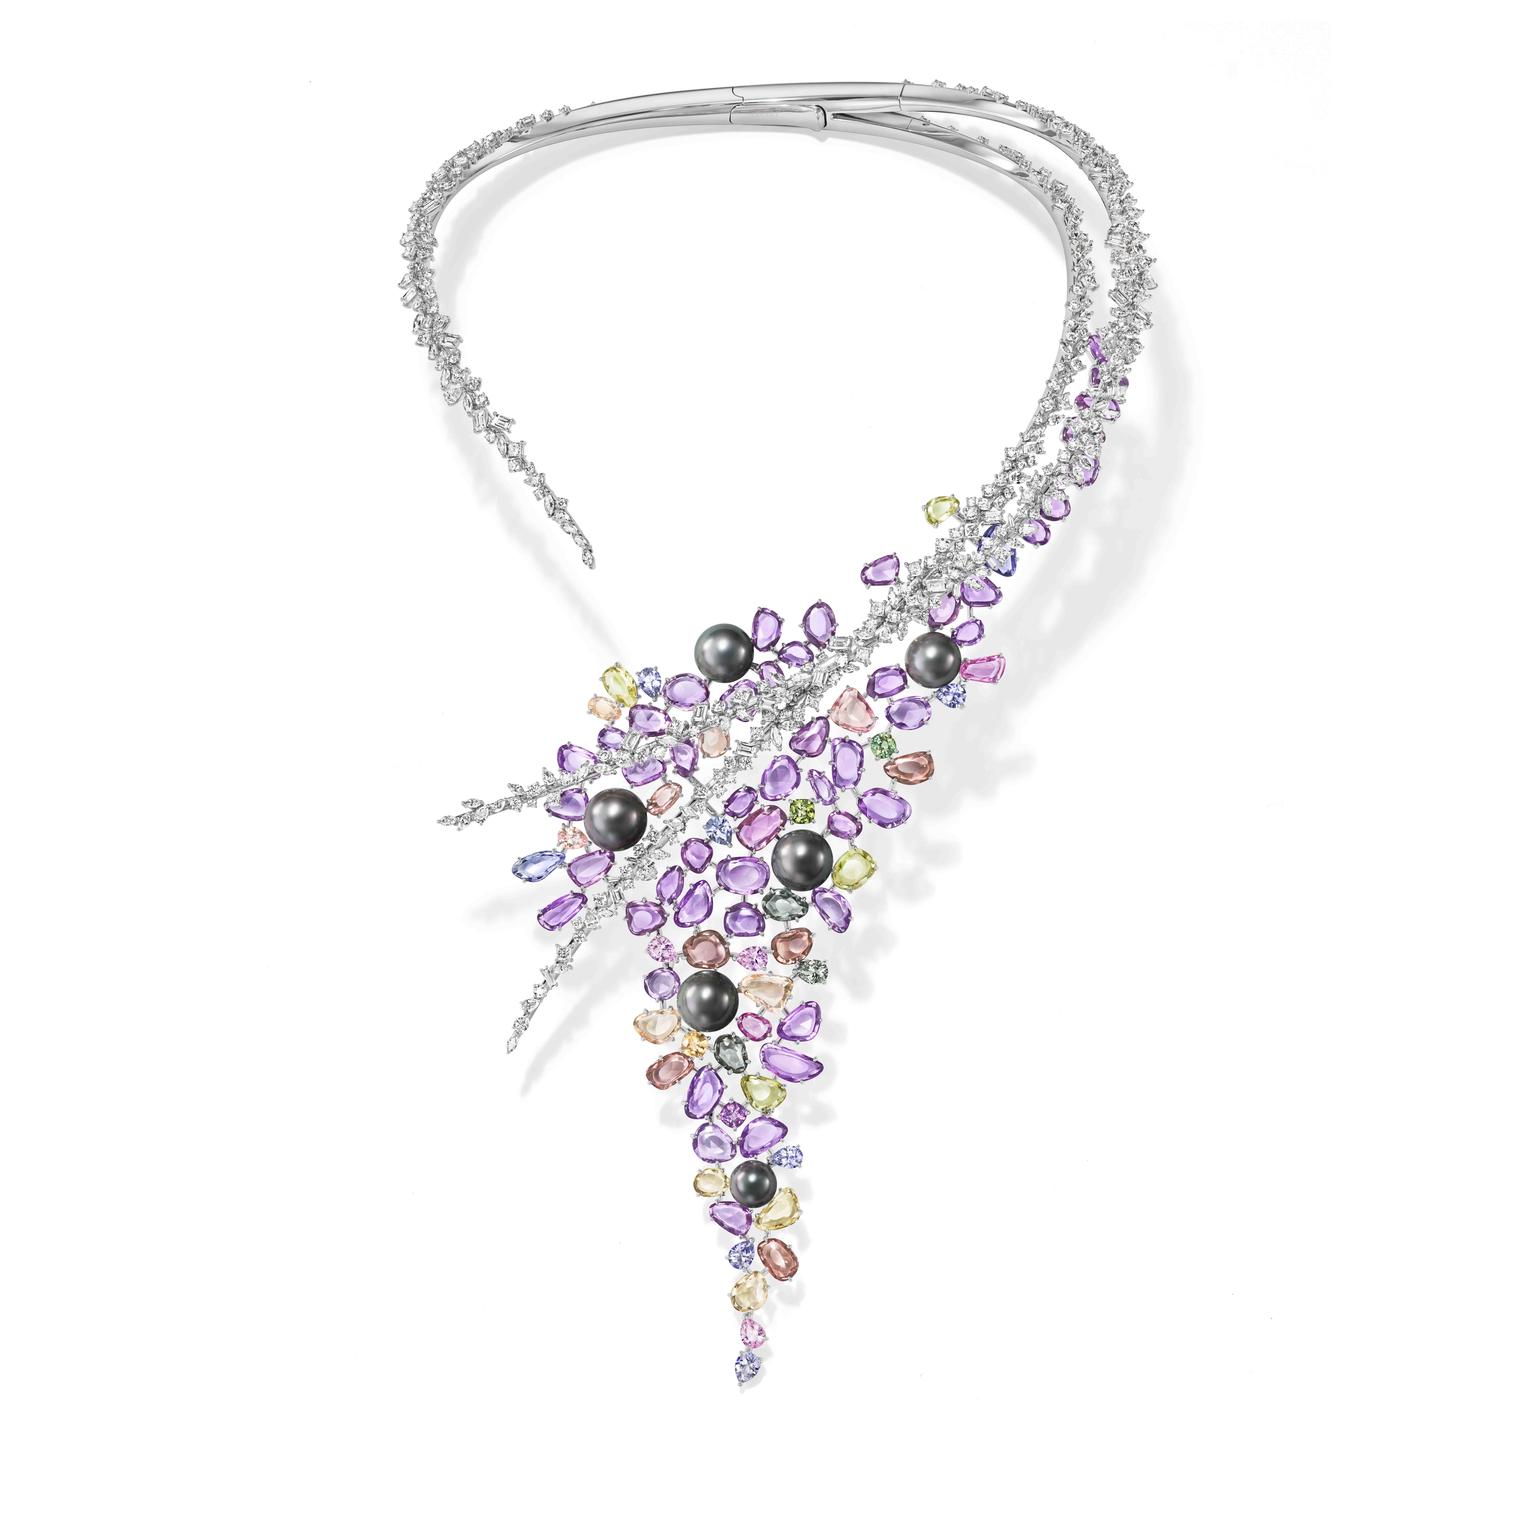 The Most Luxurious High Jewelry for Spring